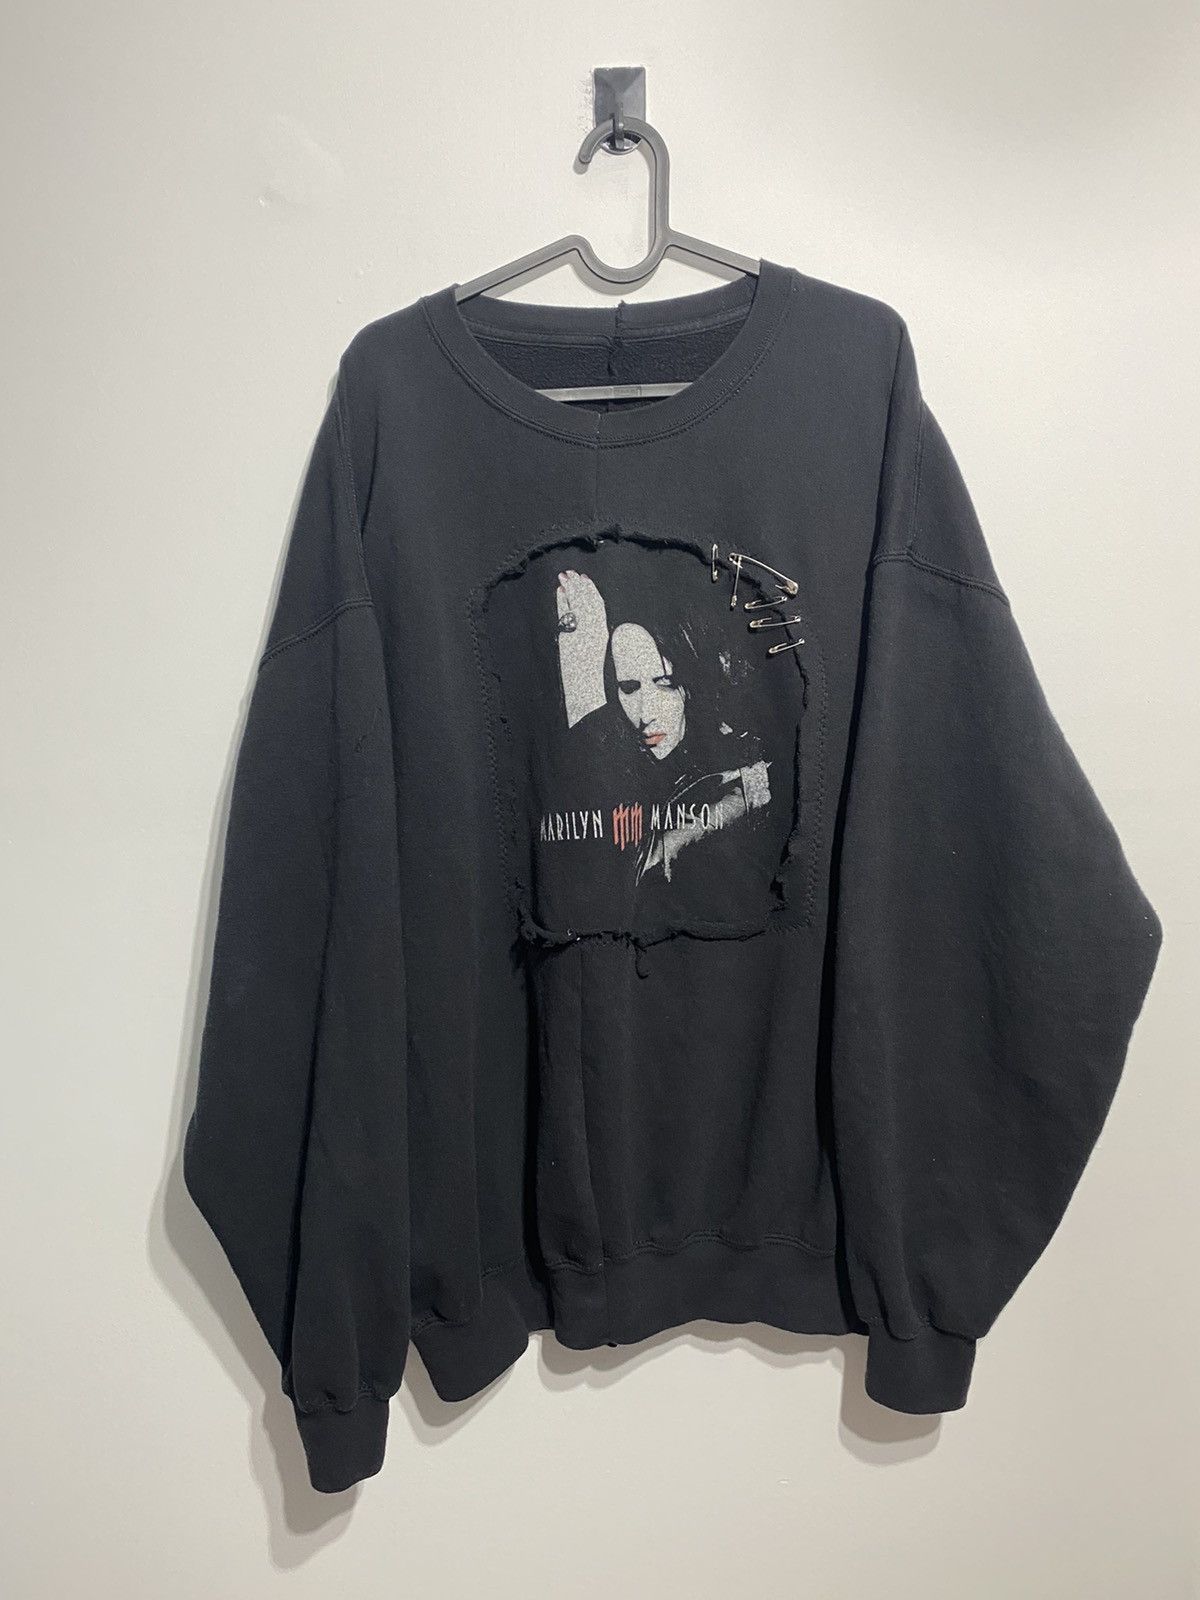 Pre-owned Archival Clothing X Vintage Sinister 1 Of 1 Hand Made Marilyn Manson Crewneck In Black